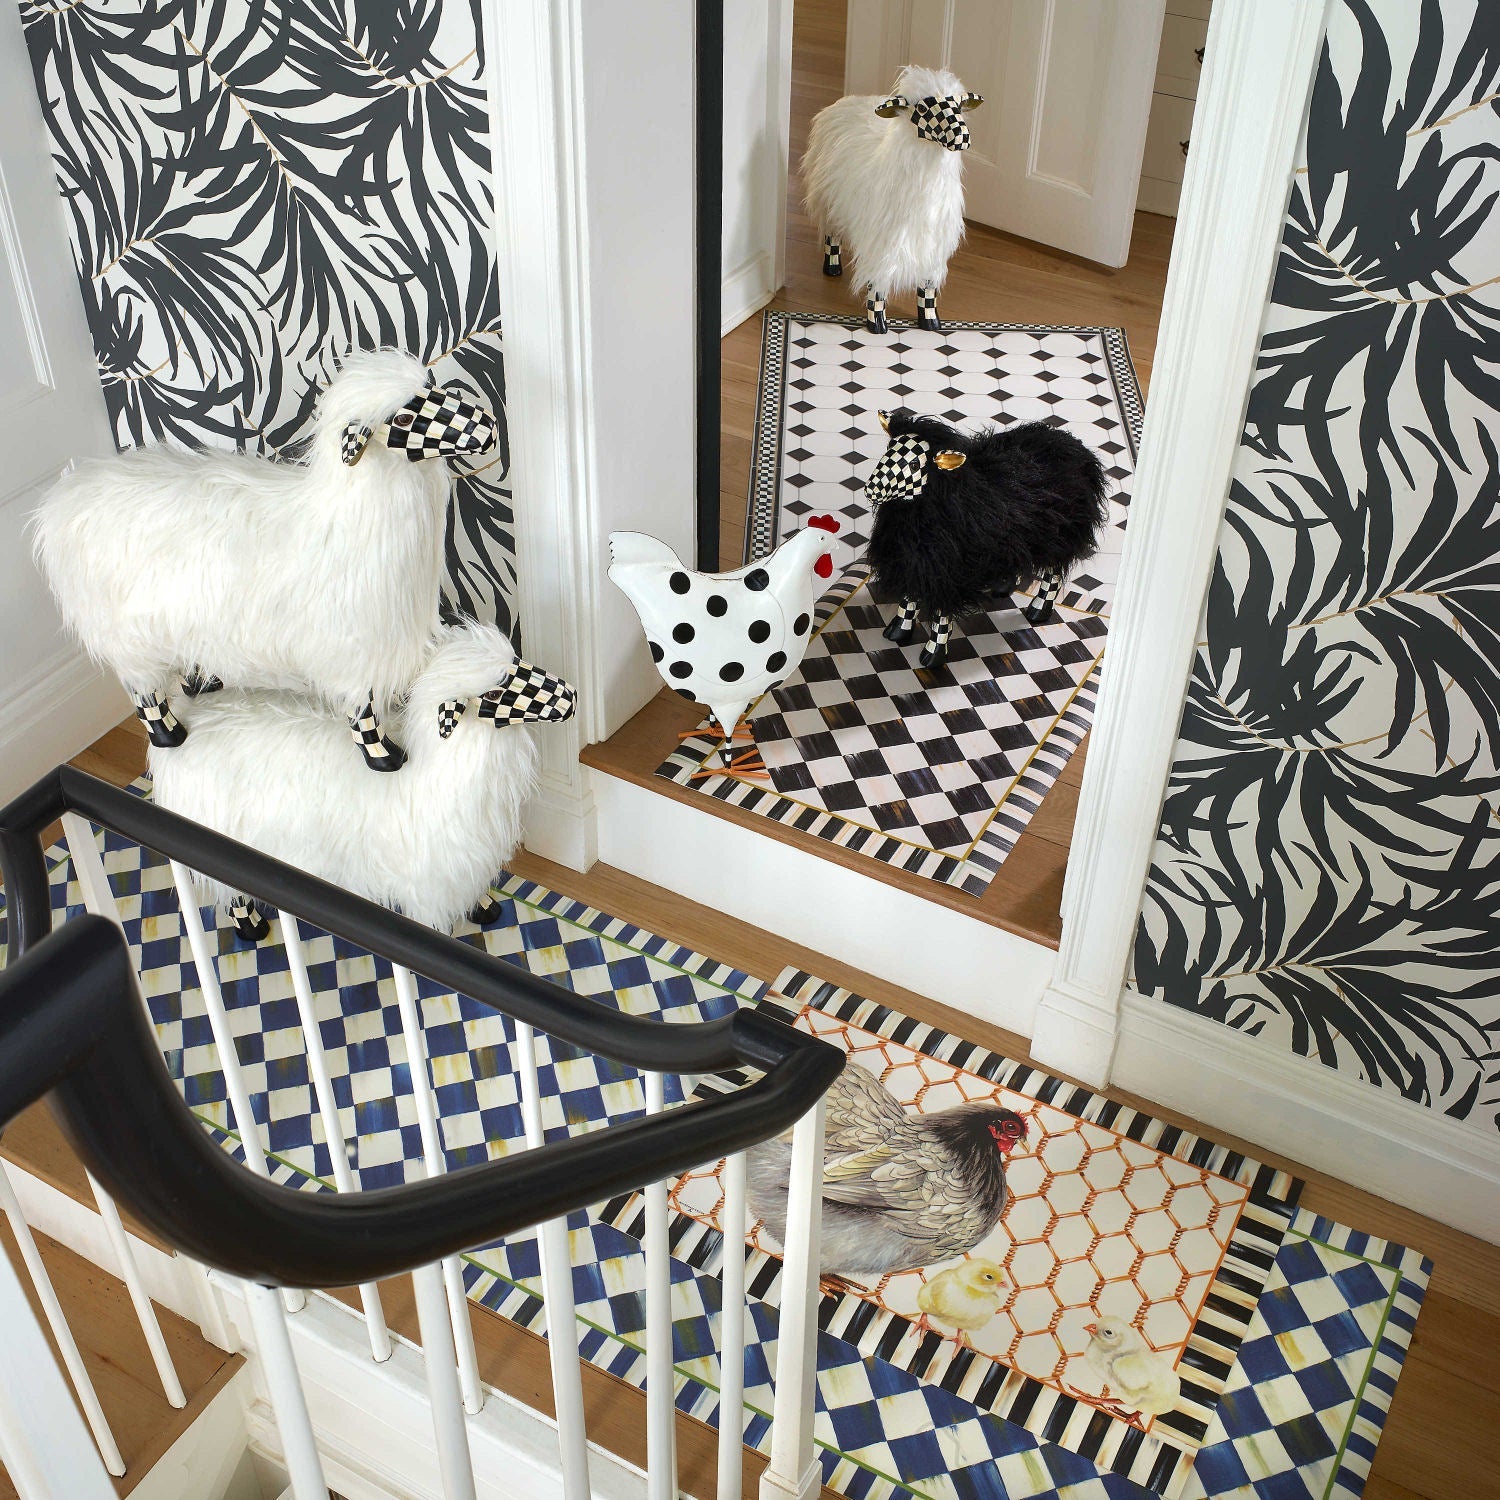 Courtly Check Black Sheep - Small - |VESIMI Design| Luxury Bathrooms and Home Decor